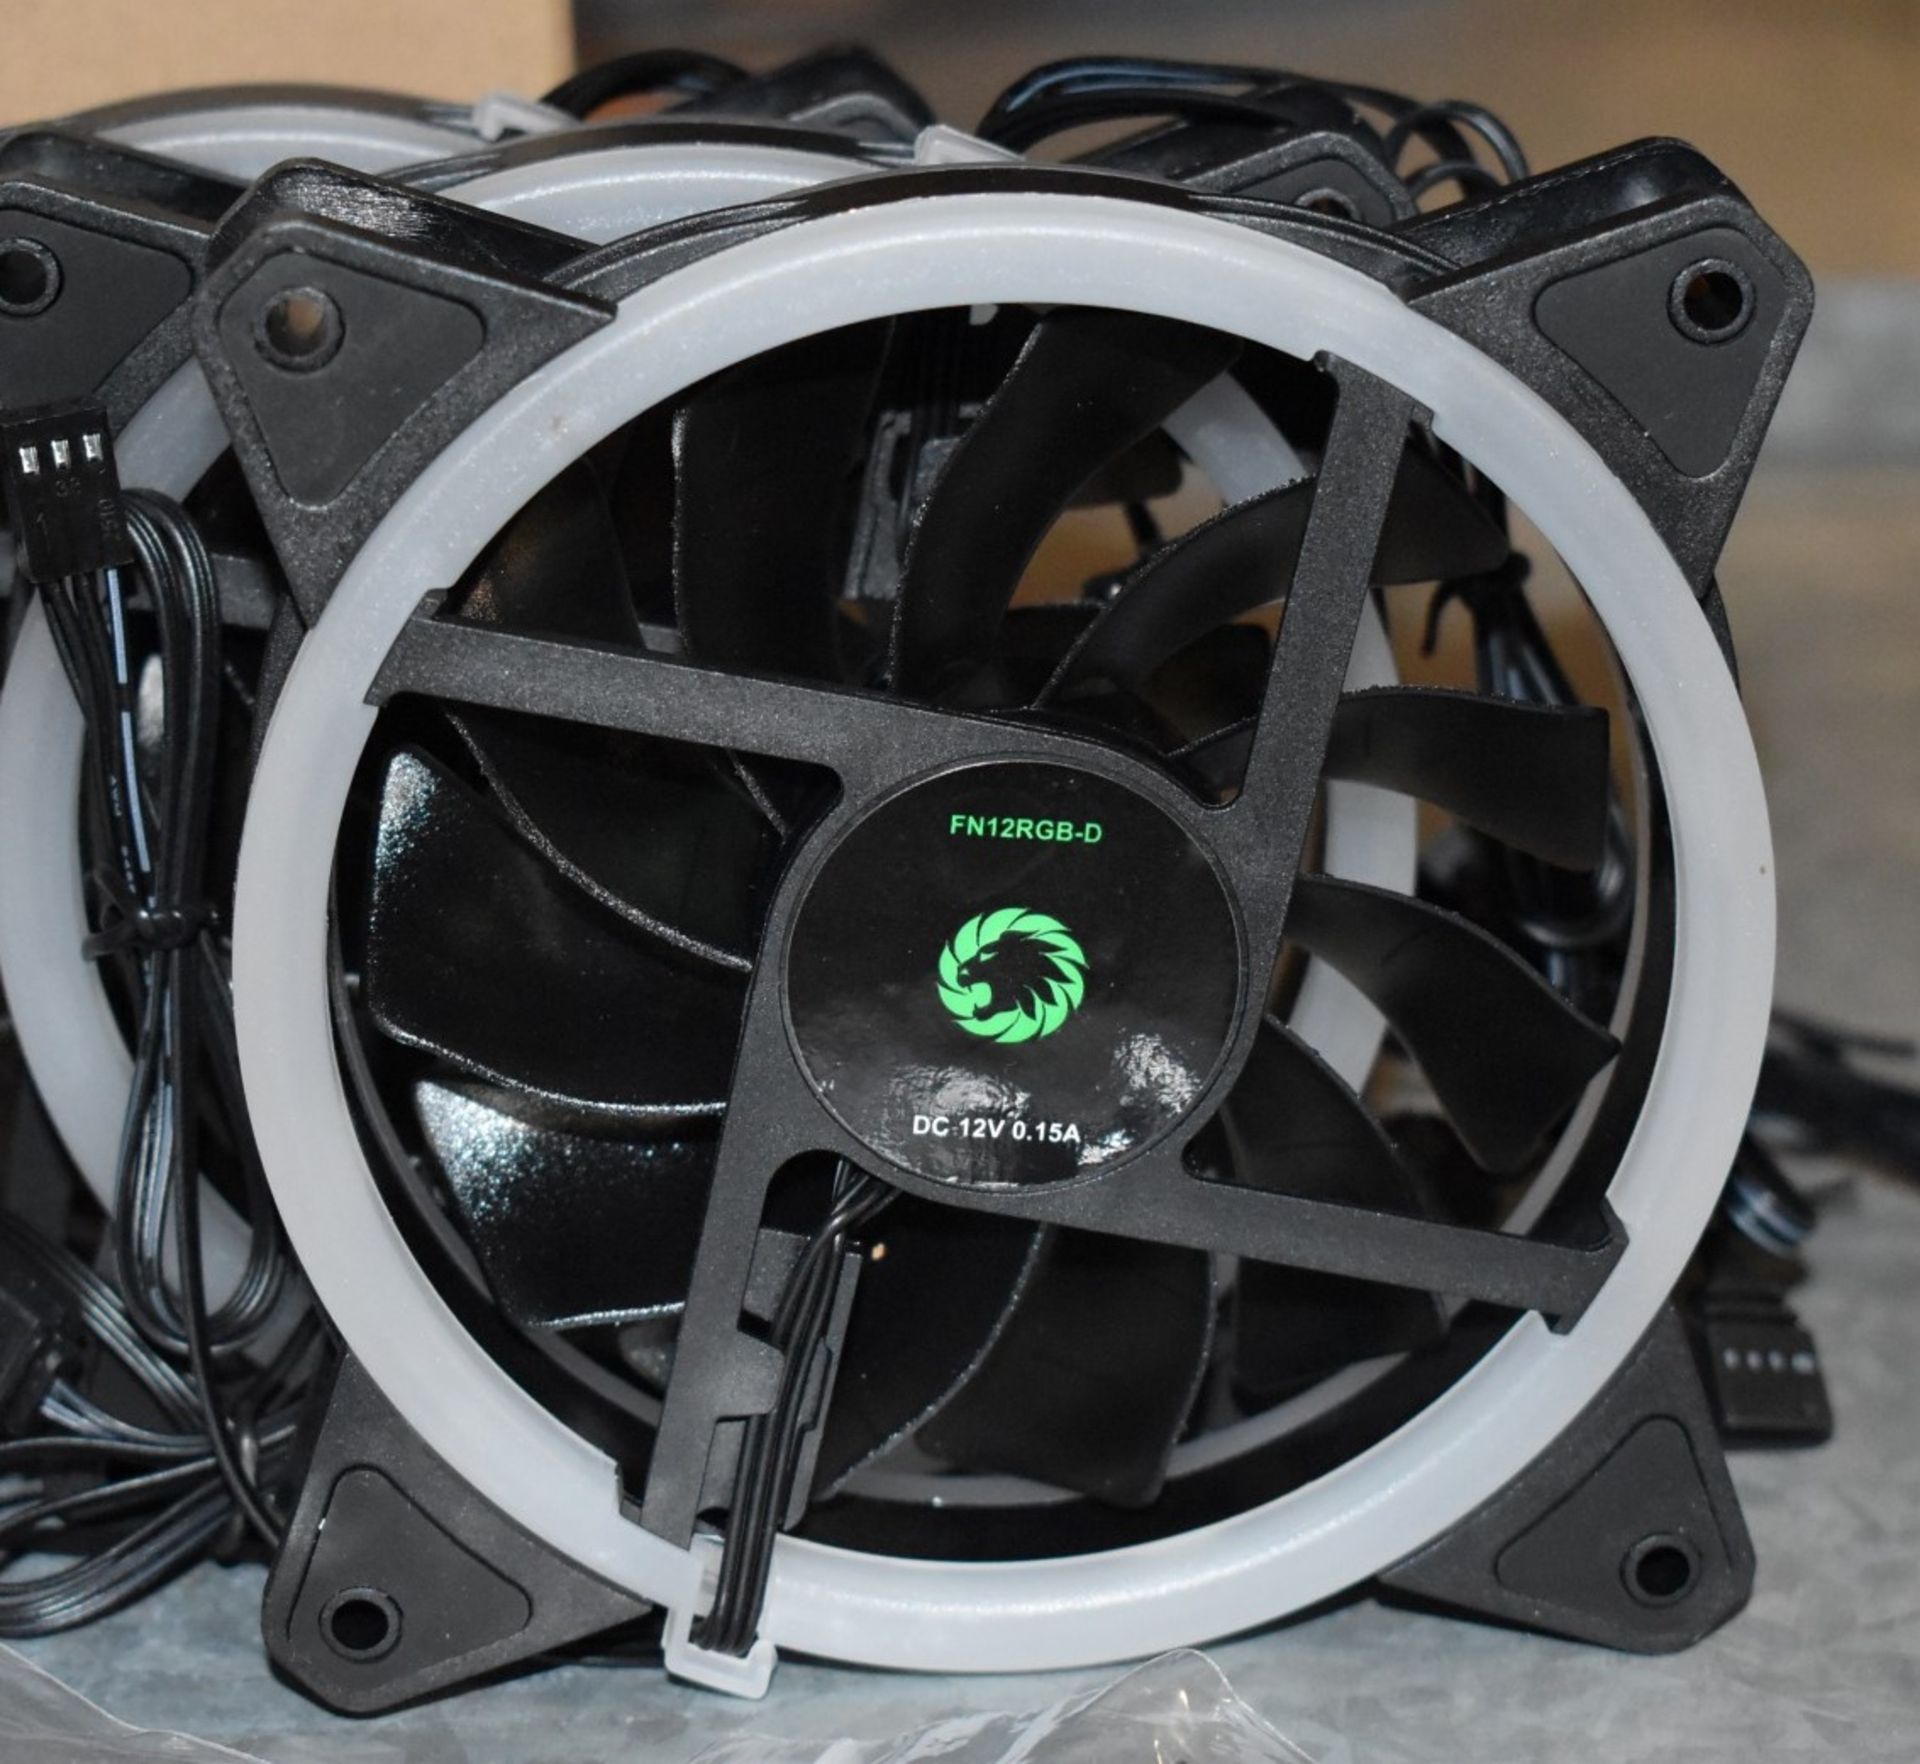 1 x GameMax LED Fan Pack For PC Gaming Cases - Includes 3 x 120mm LED Case Fans, Mounting Screws - Image 3 of 8